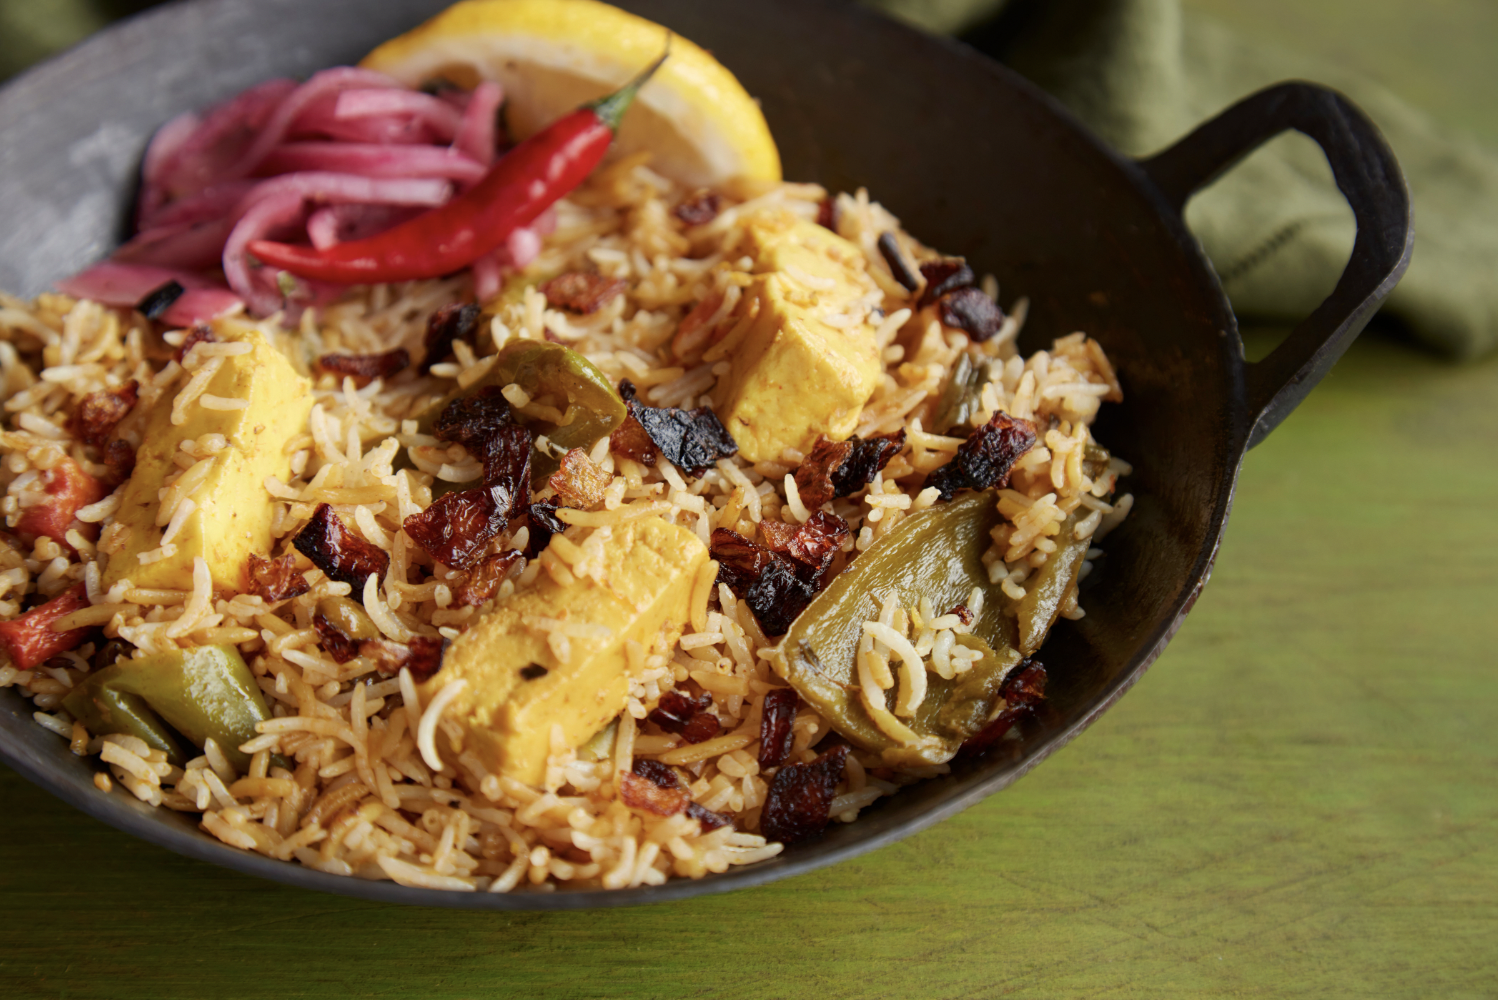 Paneer Biryani - - Cubes of Indian cottage cheese simmered in a mixture of spices, green bell peppers and aromatics until tender. Cooked with long grain basmati spiced rice. Garnished with fresh lemon, Thai chili pepper, fried and pickled onions.
- Vegetarian & Gluten Free